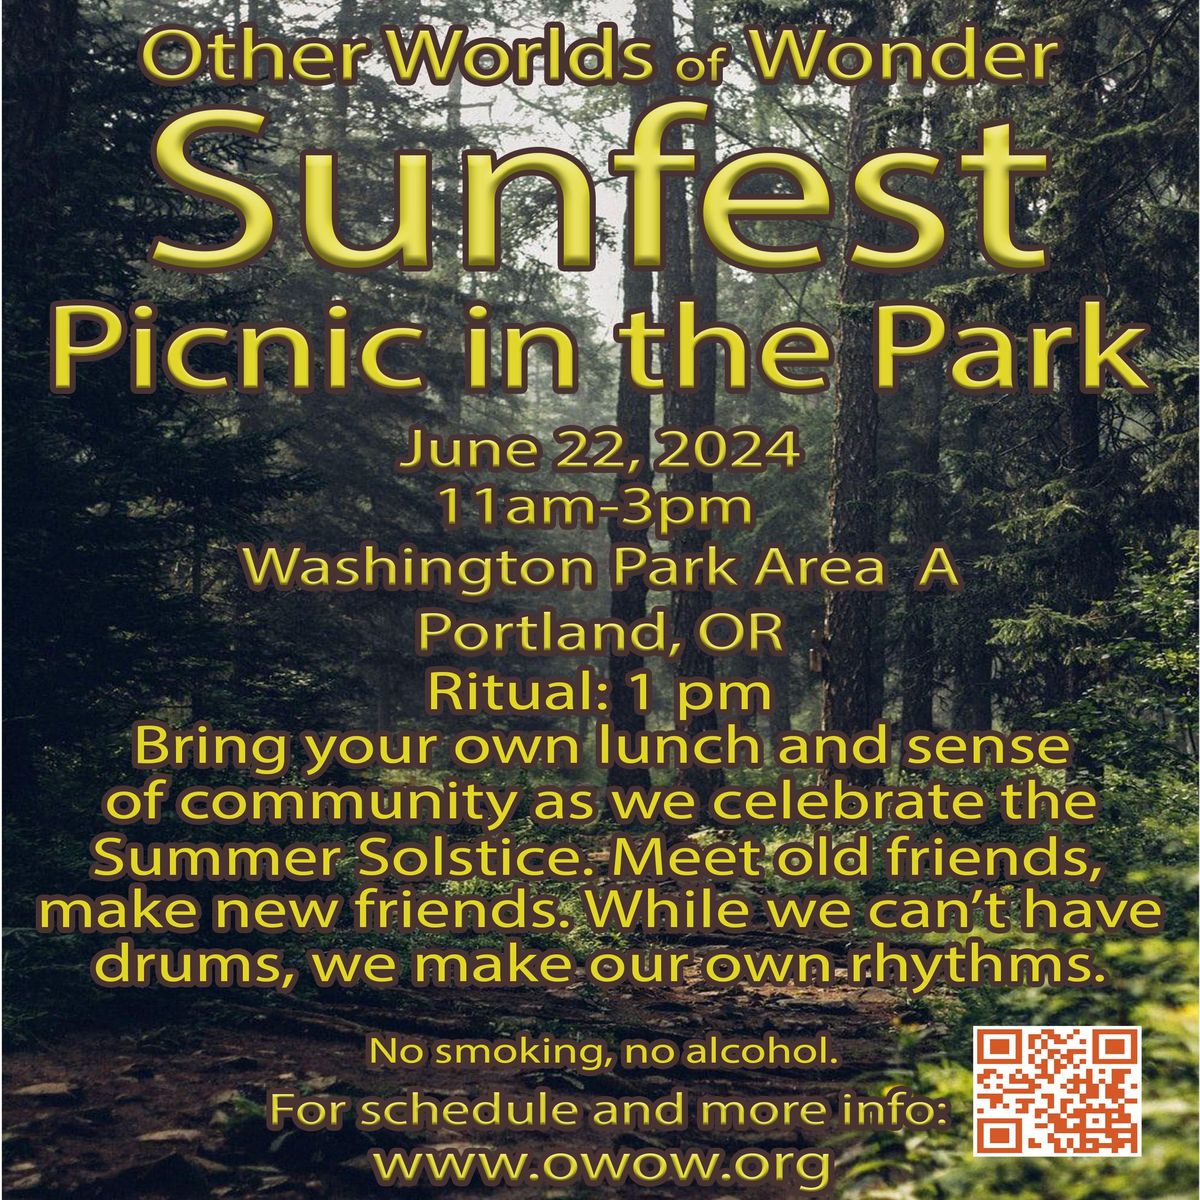 Sunfest Picnic in the Park